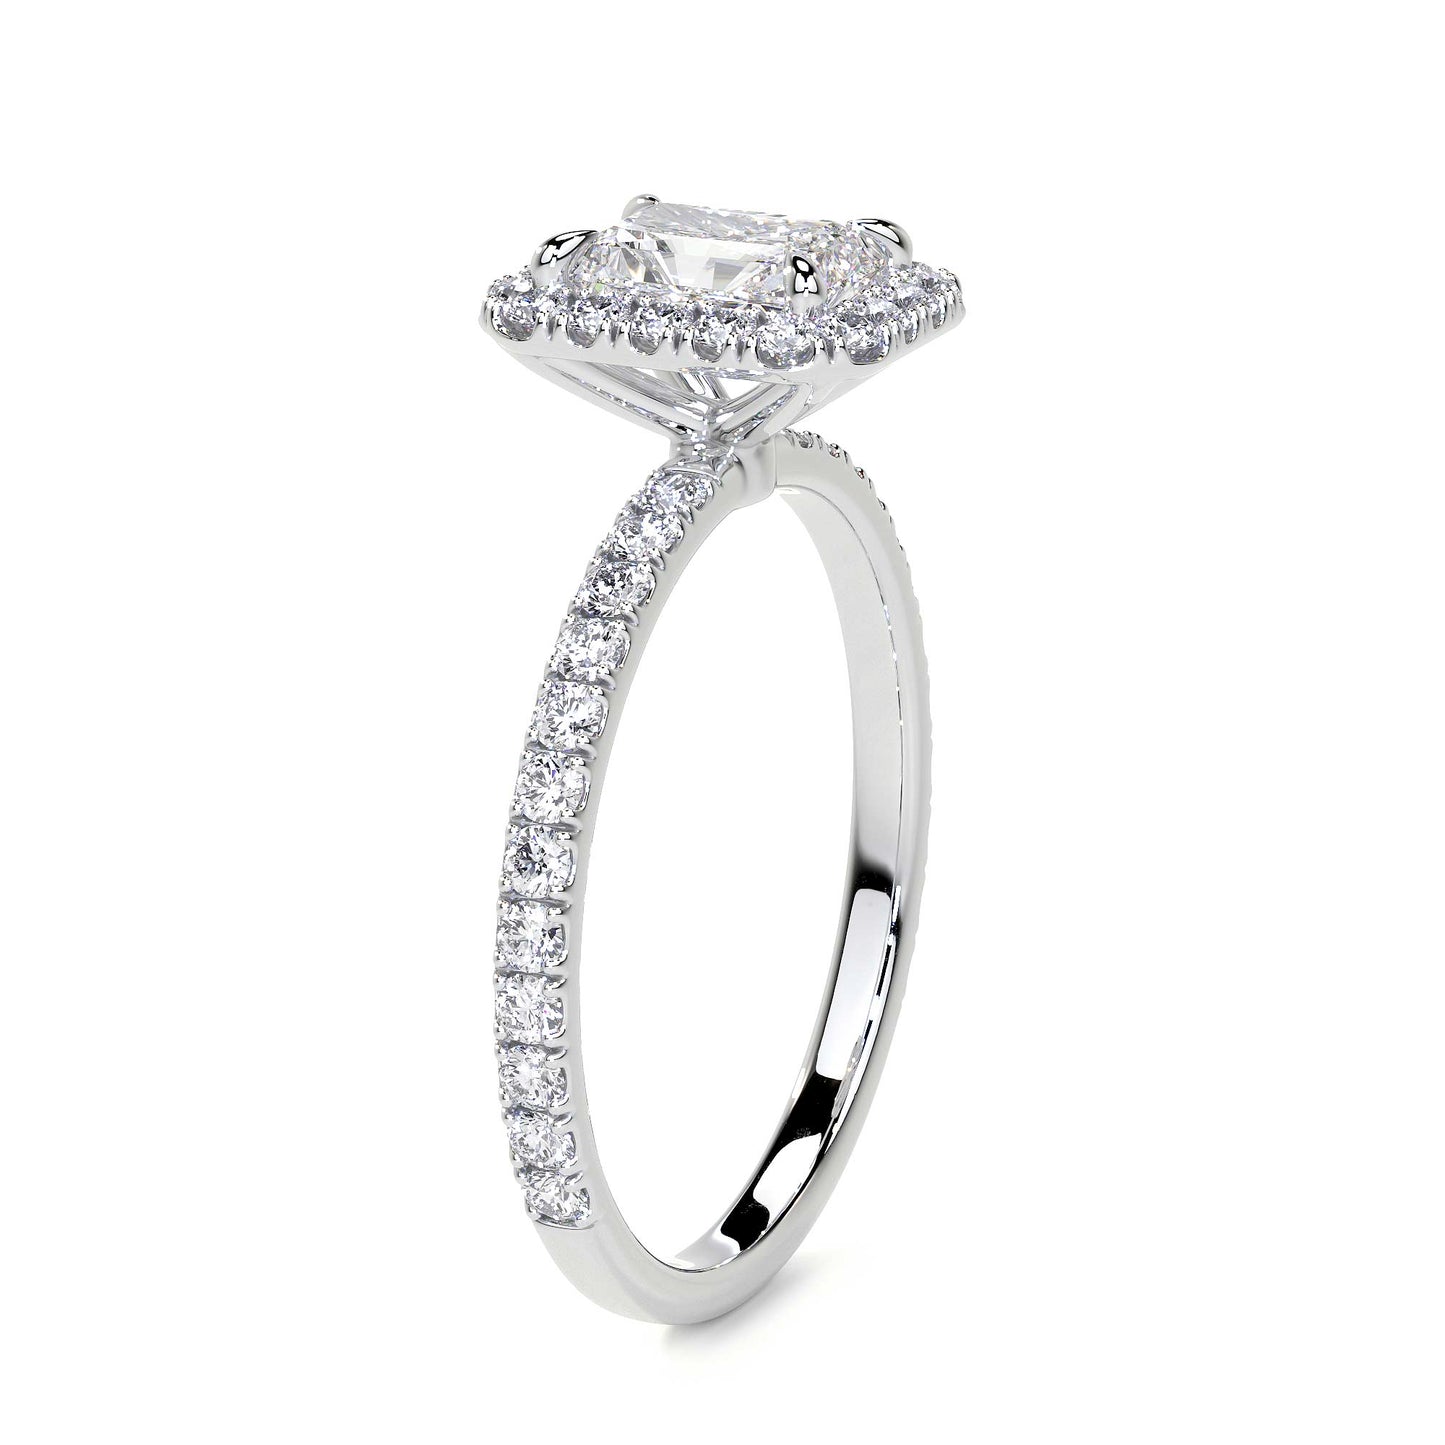 Radiant Cut Cluster Diamond Ring with Halo